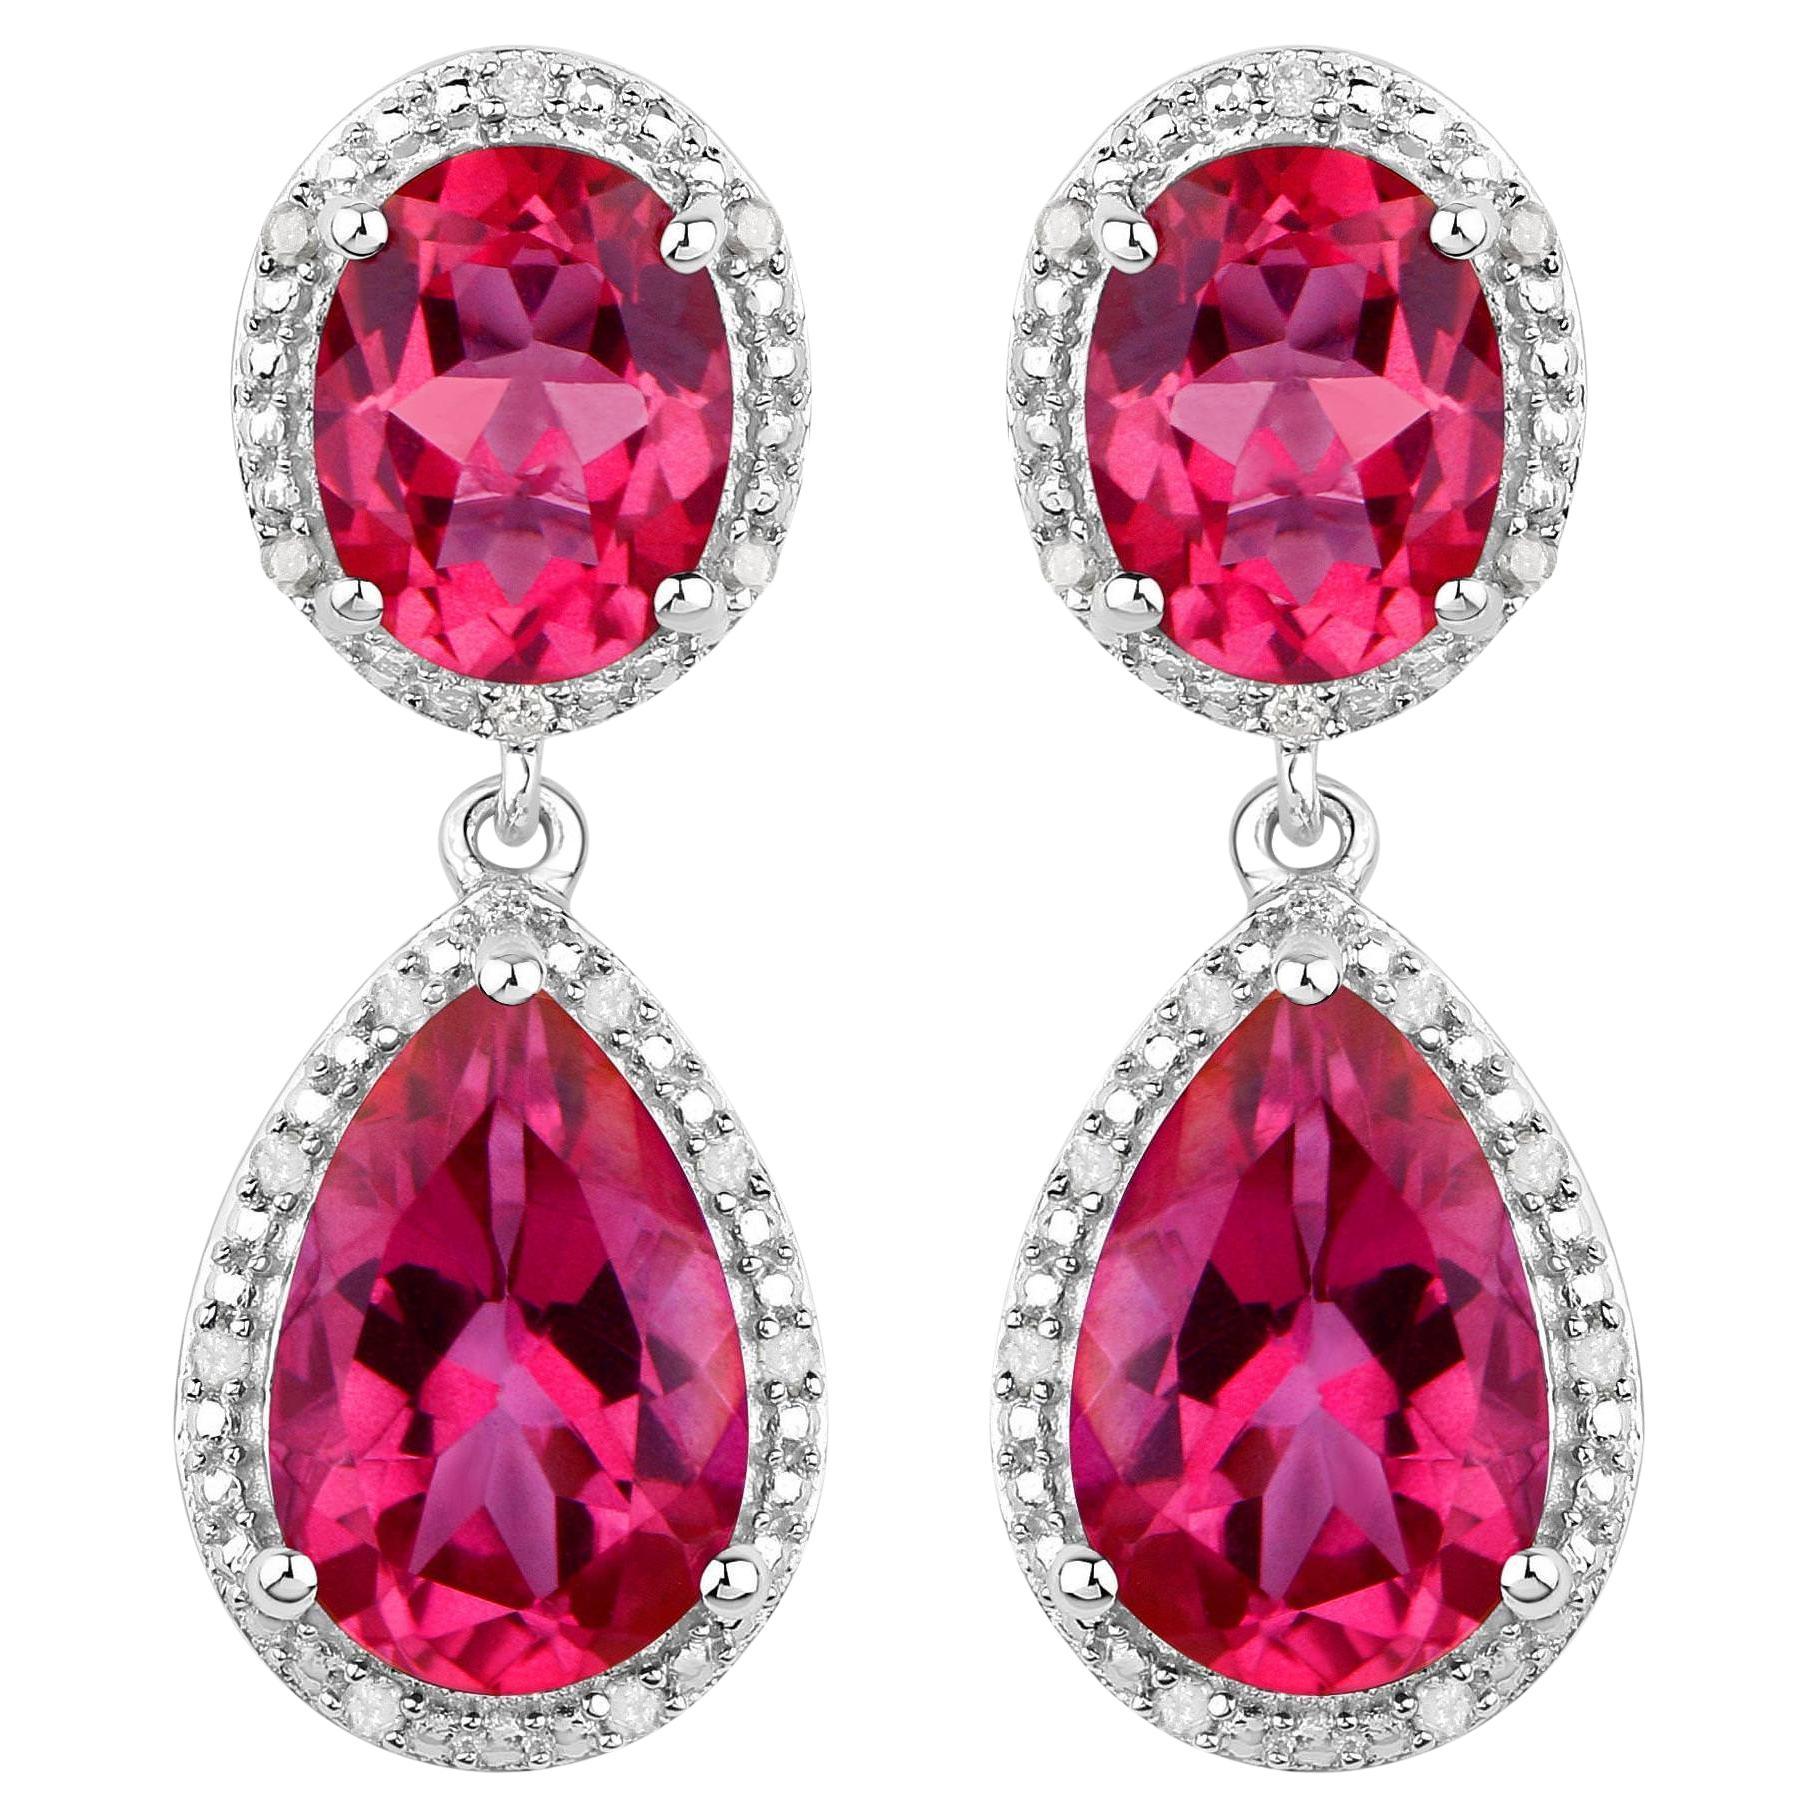 It comes with the appraisal by GIA GG/AJP
All Gemstones are Natural 
Hot Pink Topaz = 11.20 Carats
Diamonds = 0.15 Carats
Metal: Rhodium Plated Silver
Length: 30 mm